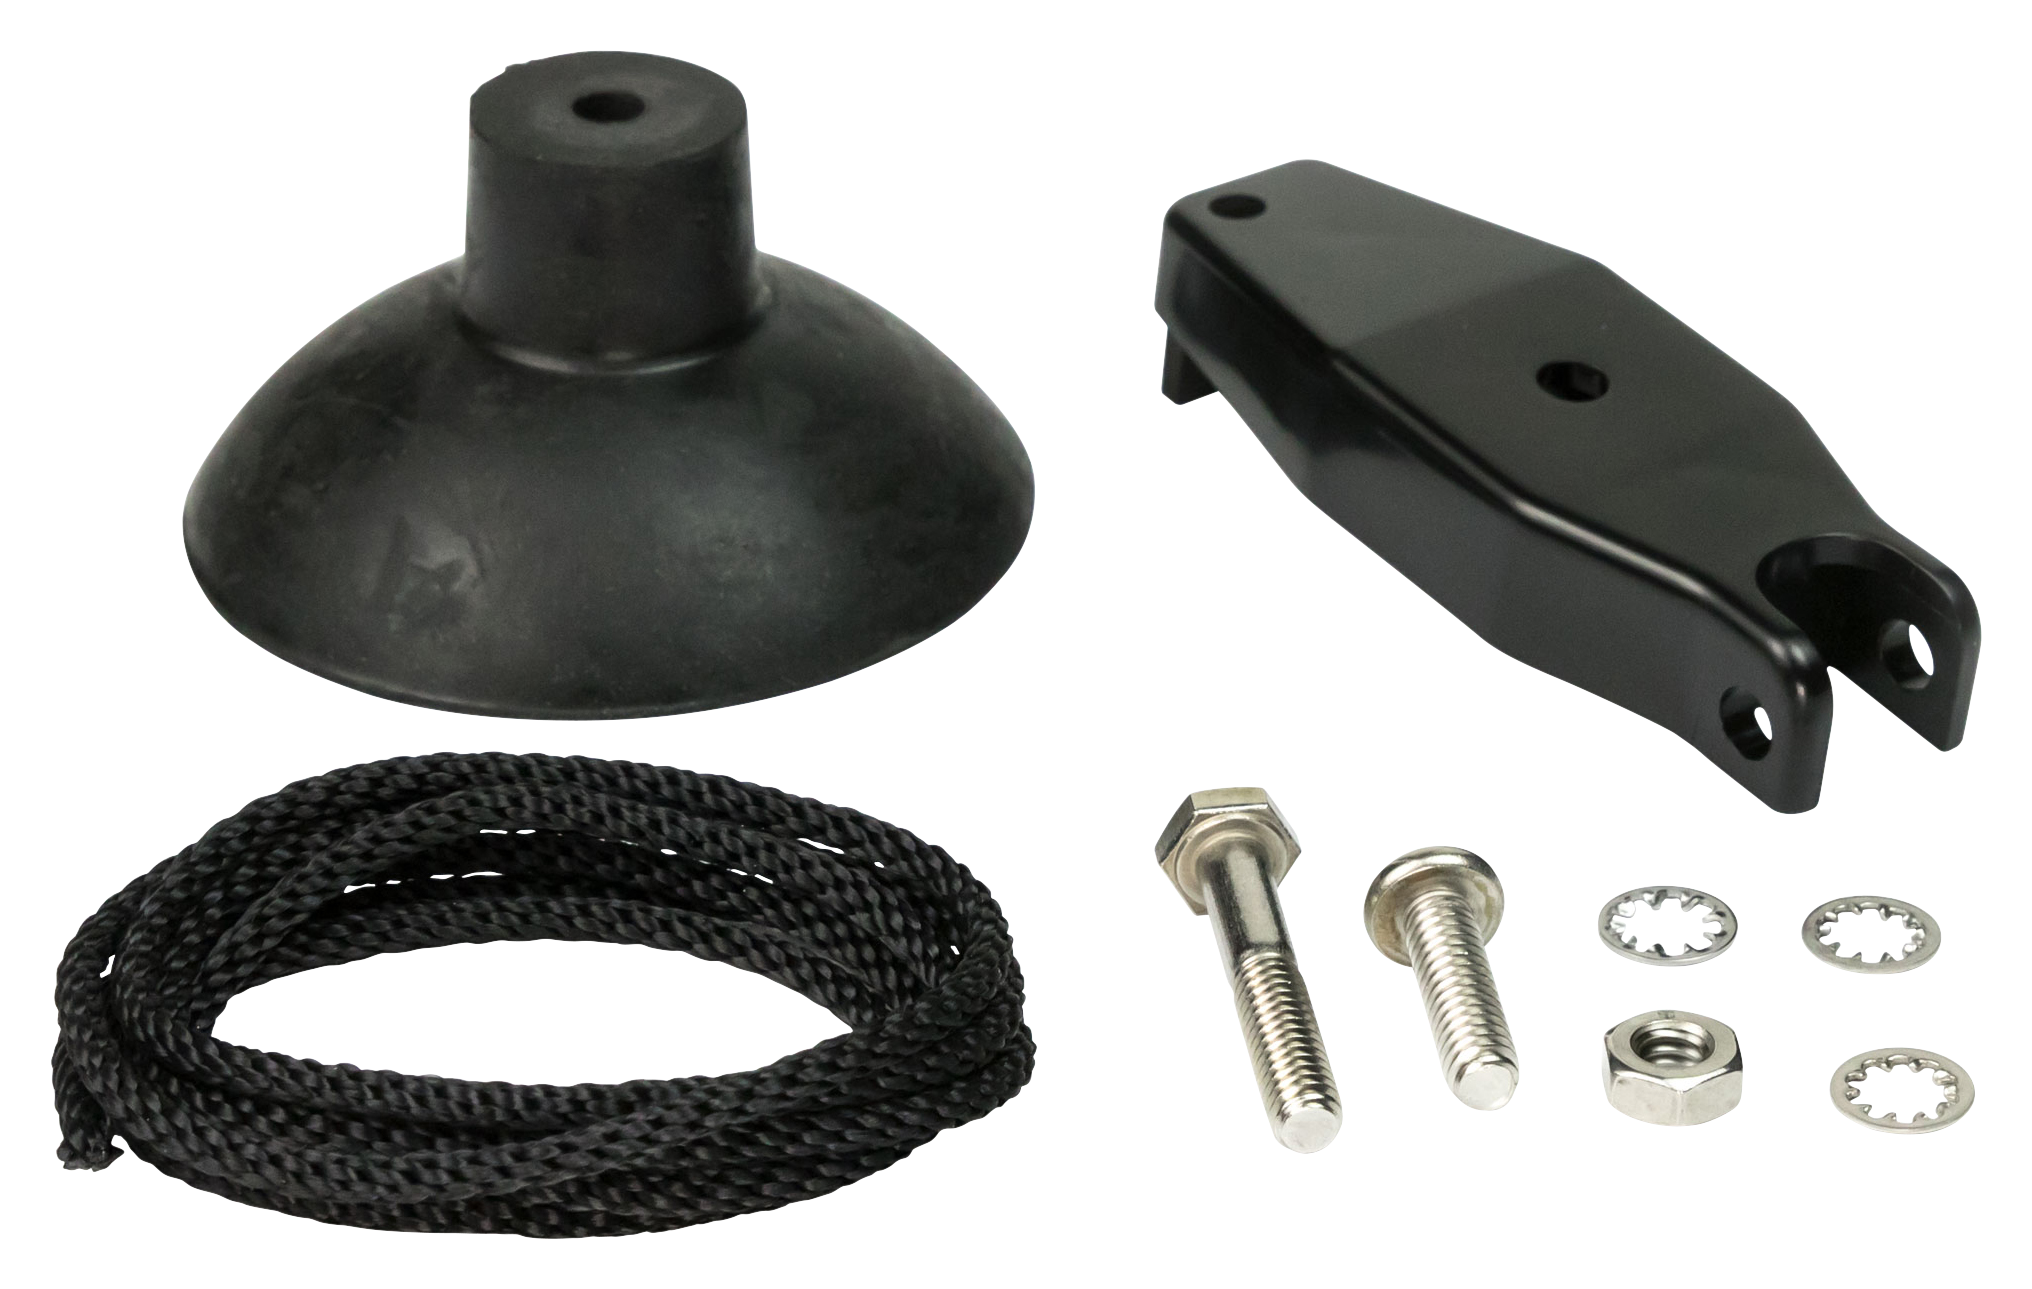 Lowrance Suction Cup Transducer Mounting Kit